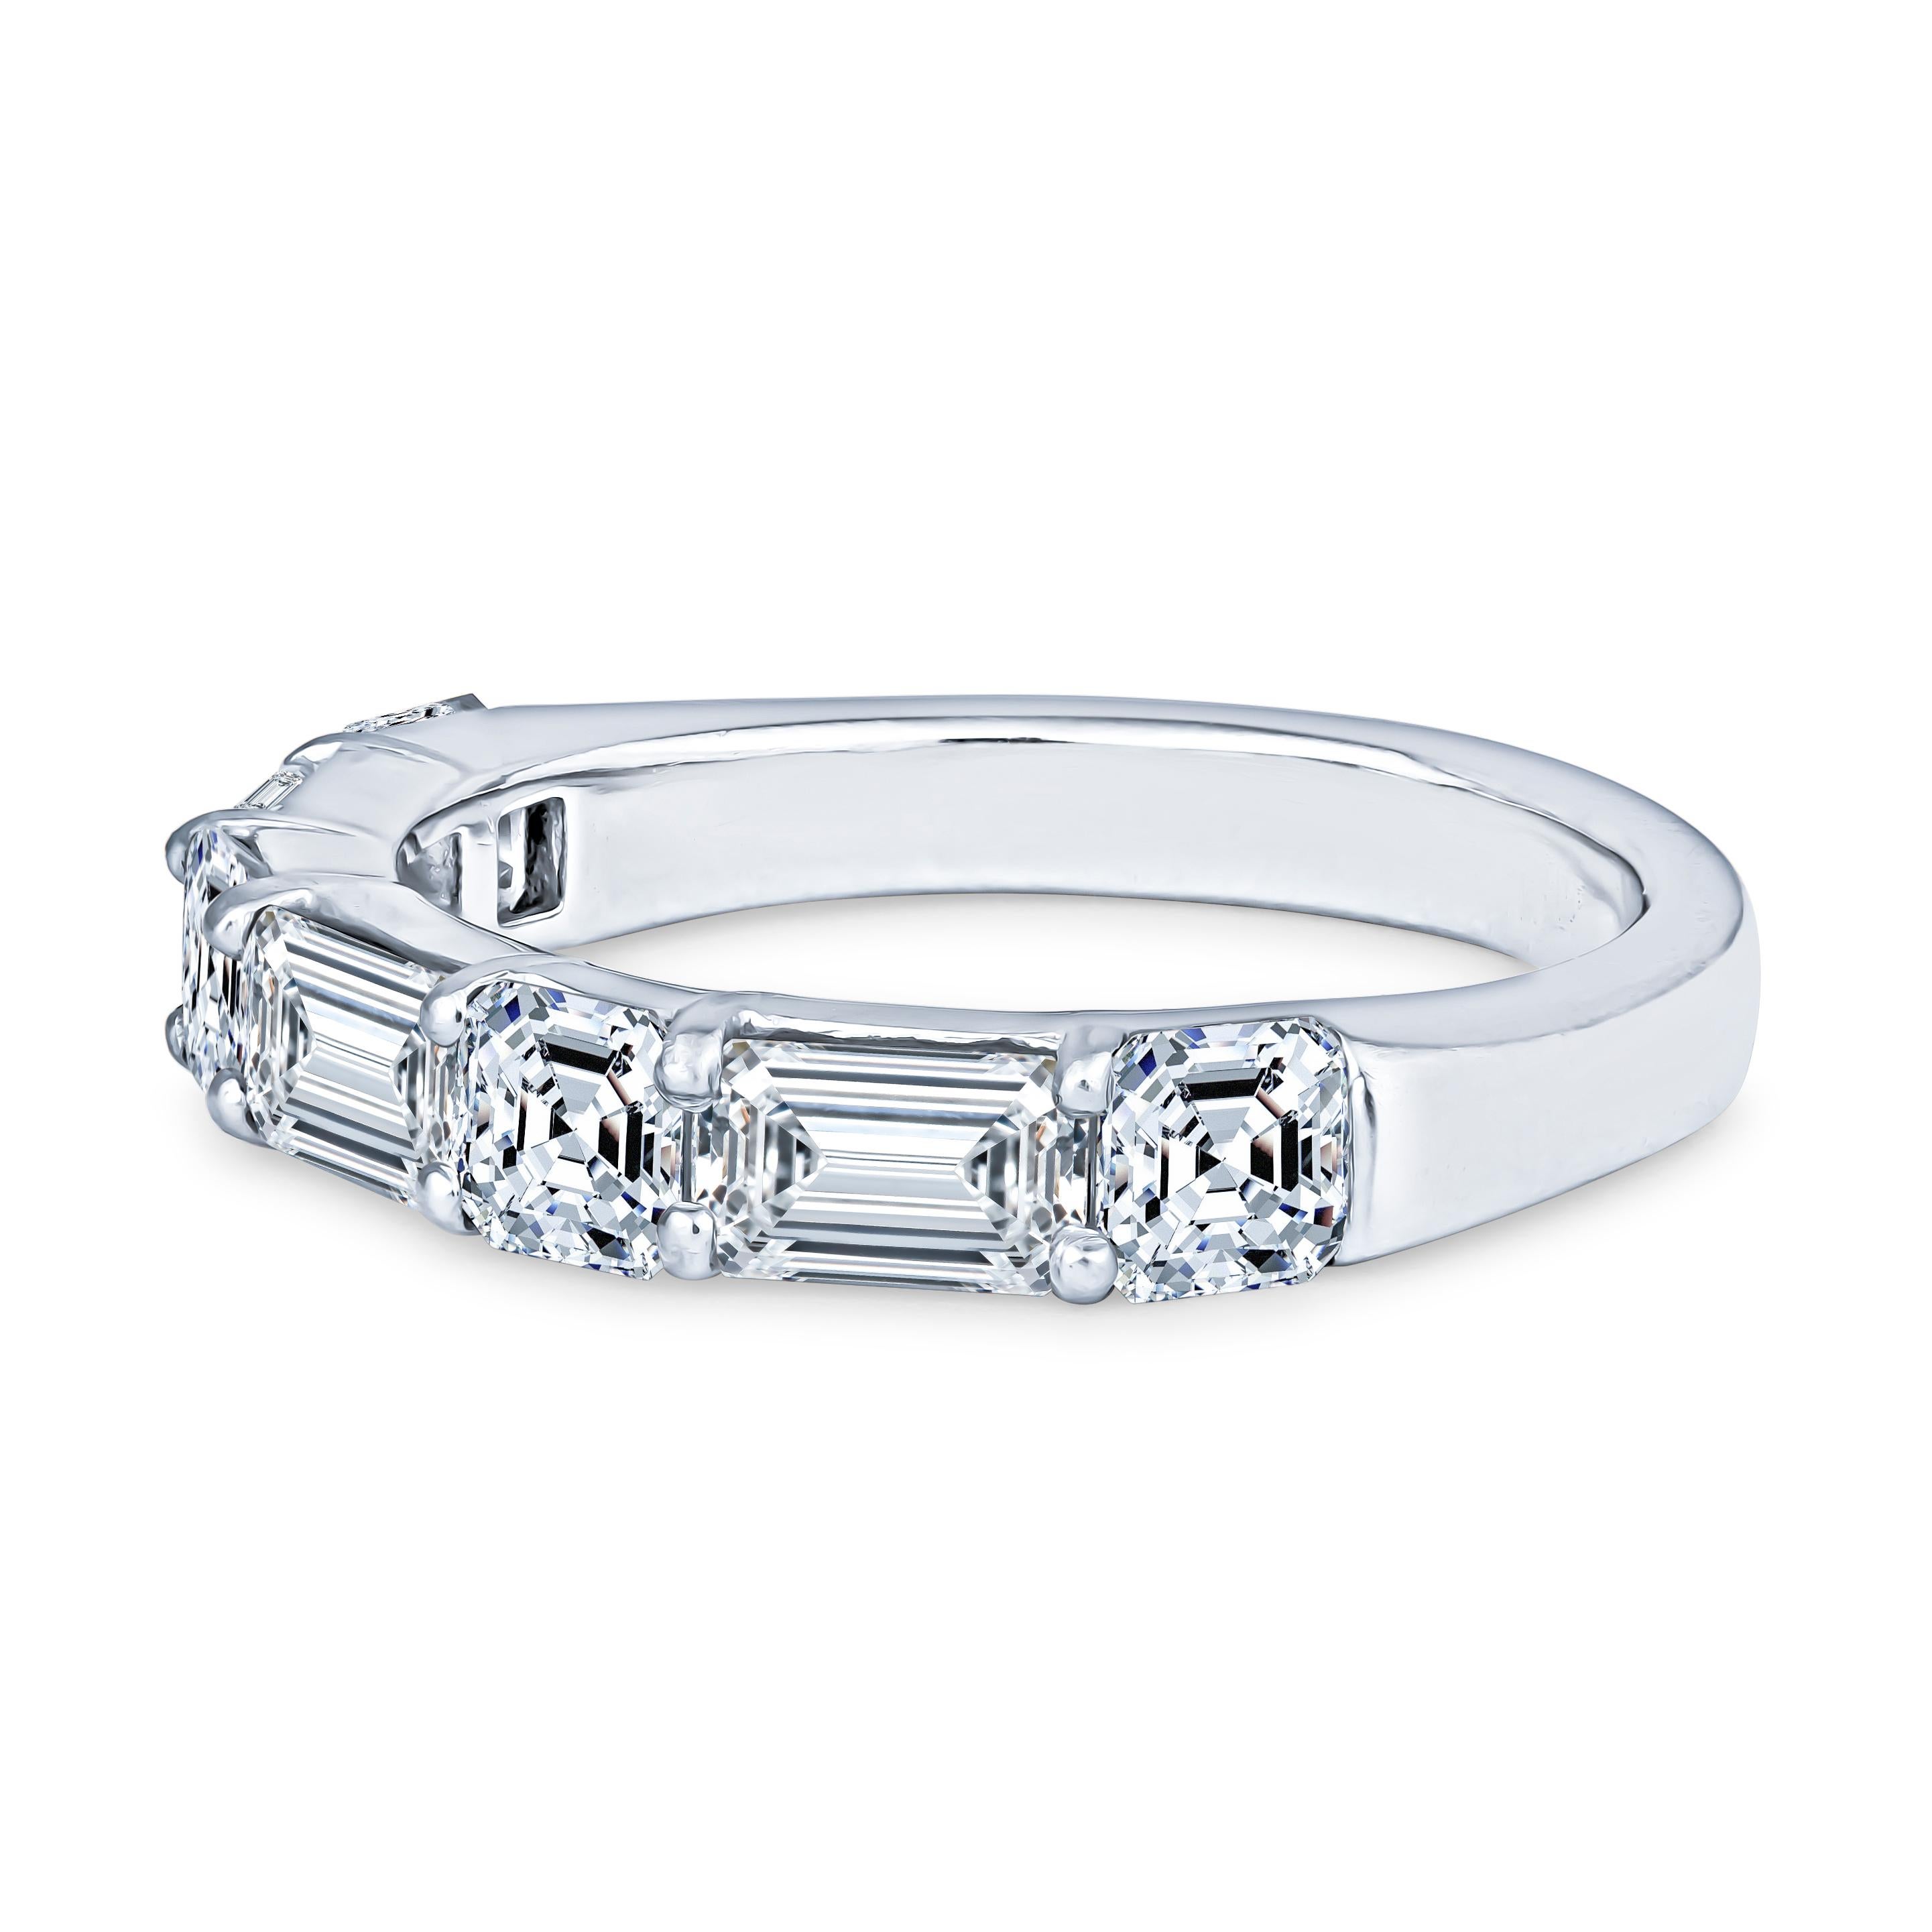 This exquisite JB Star ring has a 2.47ct total diamond weight, set in a platinum wedding band. Three of those diamonds are emerald cut, with a total weight of 1.25ct and the other four diamonds are asscher cut, at 1.22ct total weight. The ring